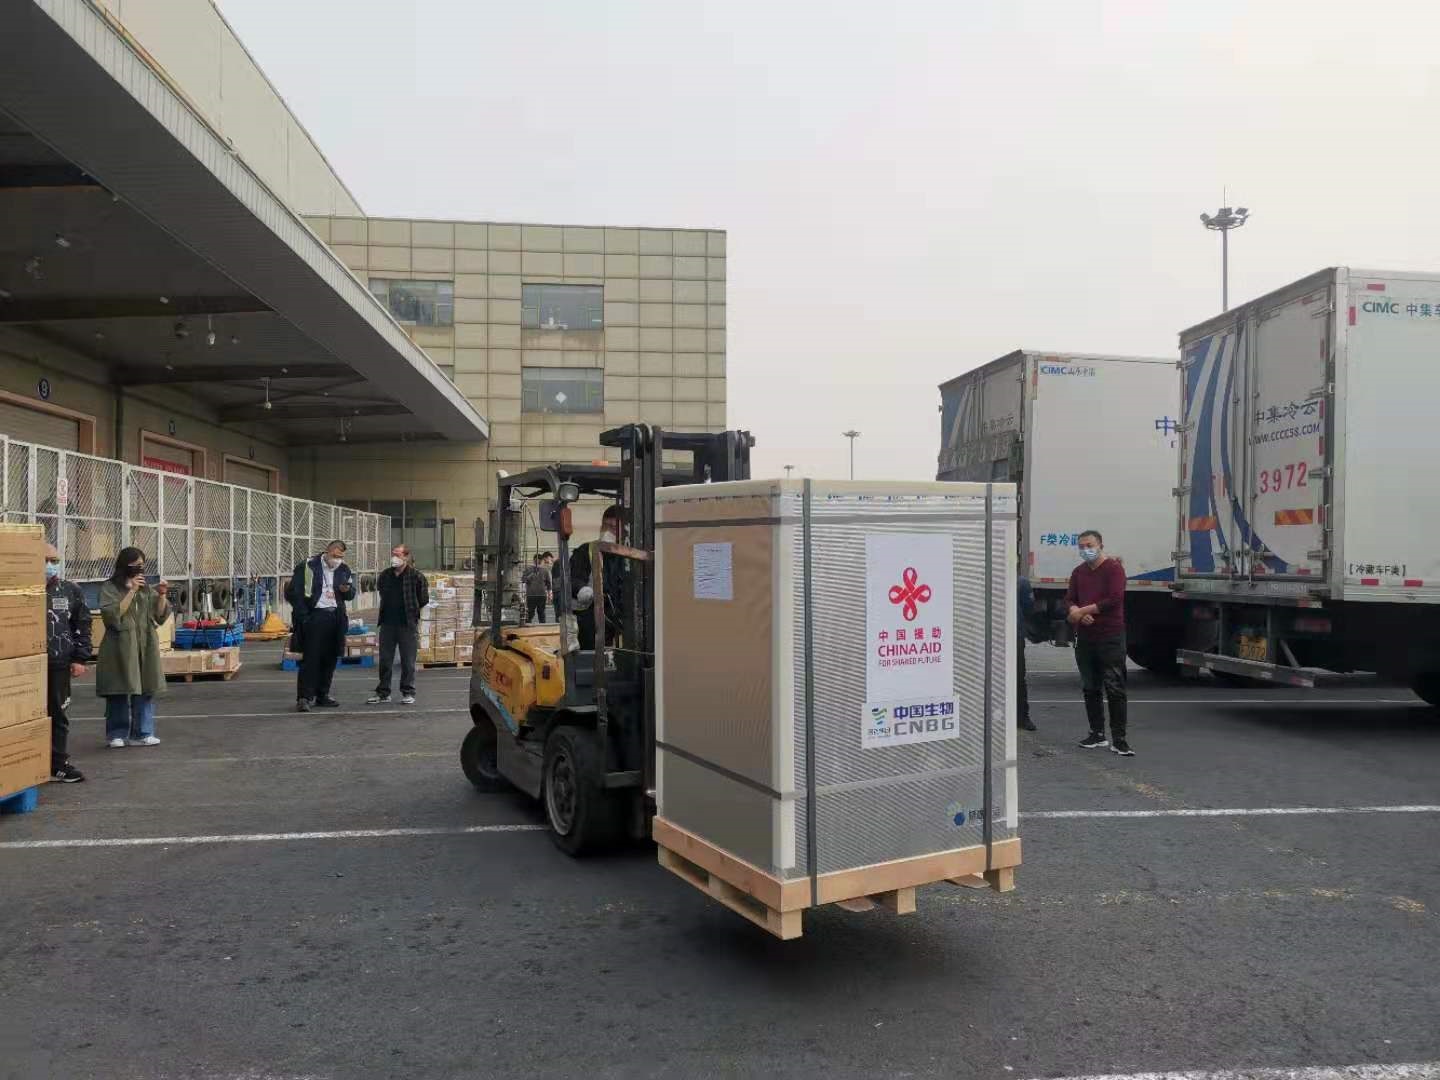 800000-doses-china-aid-covid-19-vaccines-arriving-monday